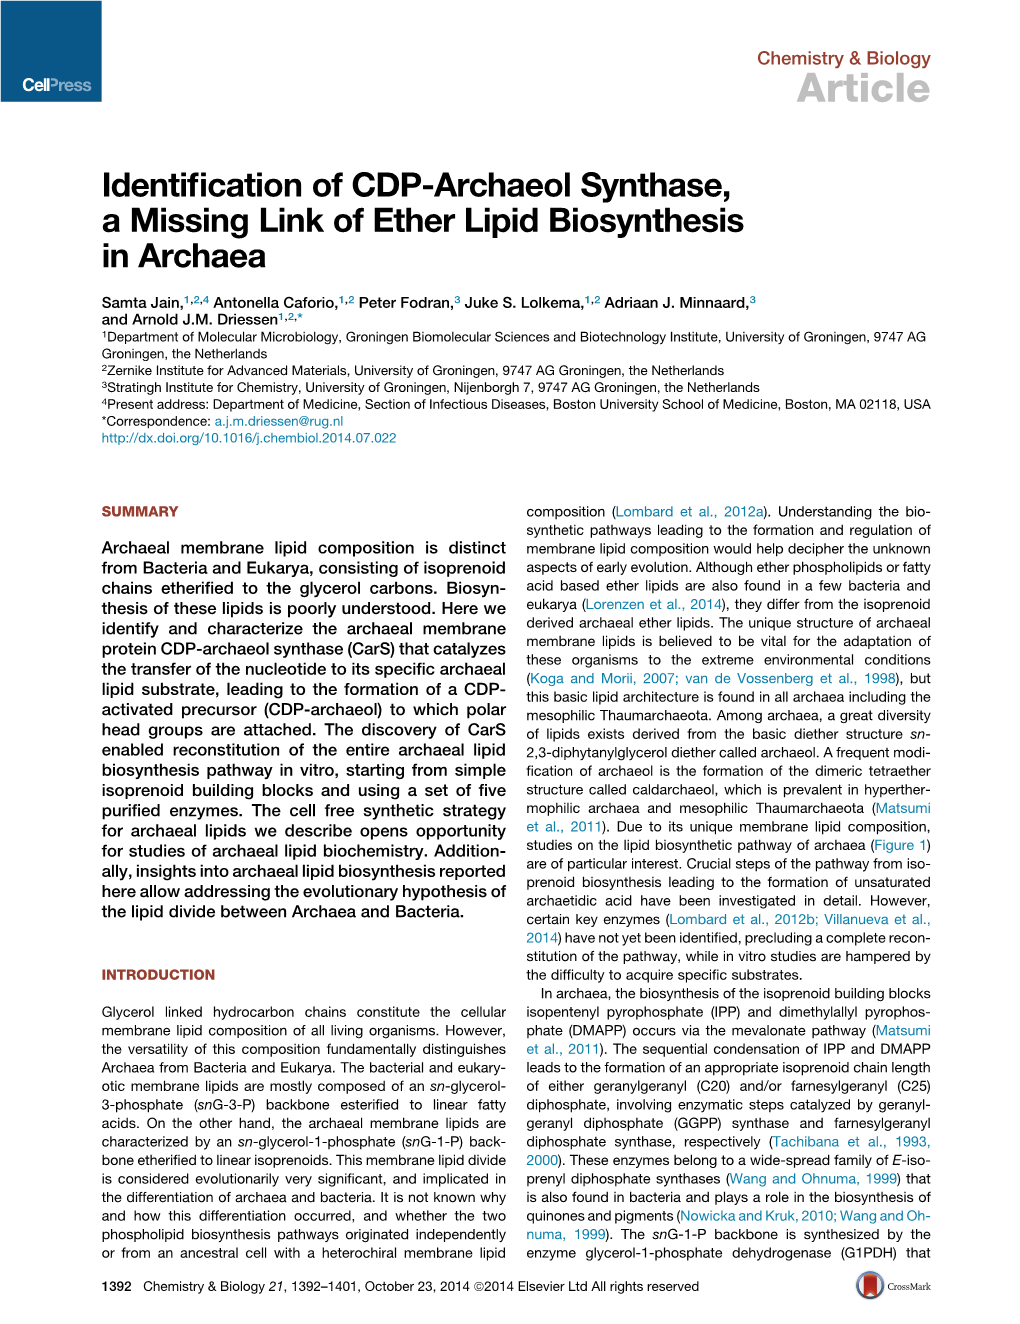 Identification of CDP-Archaeol Synthase, a Missing Link of Ether Lipid Biosynthesis in Archaea